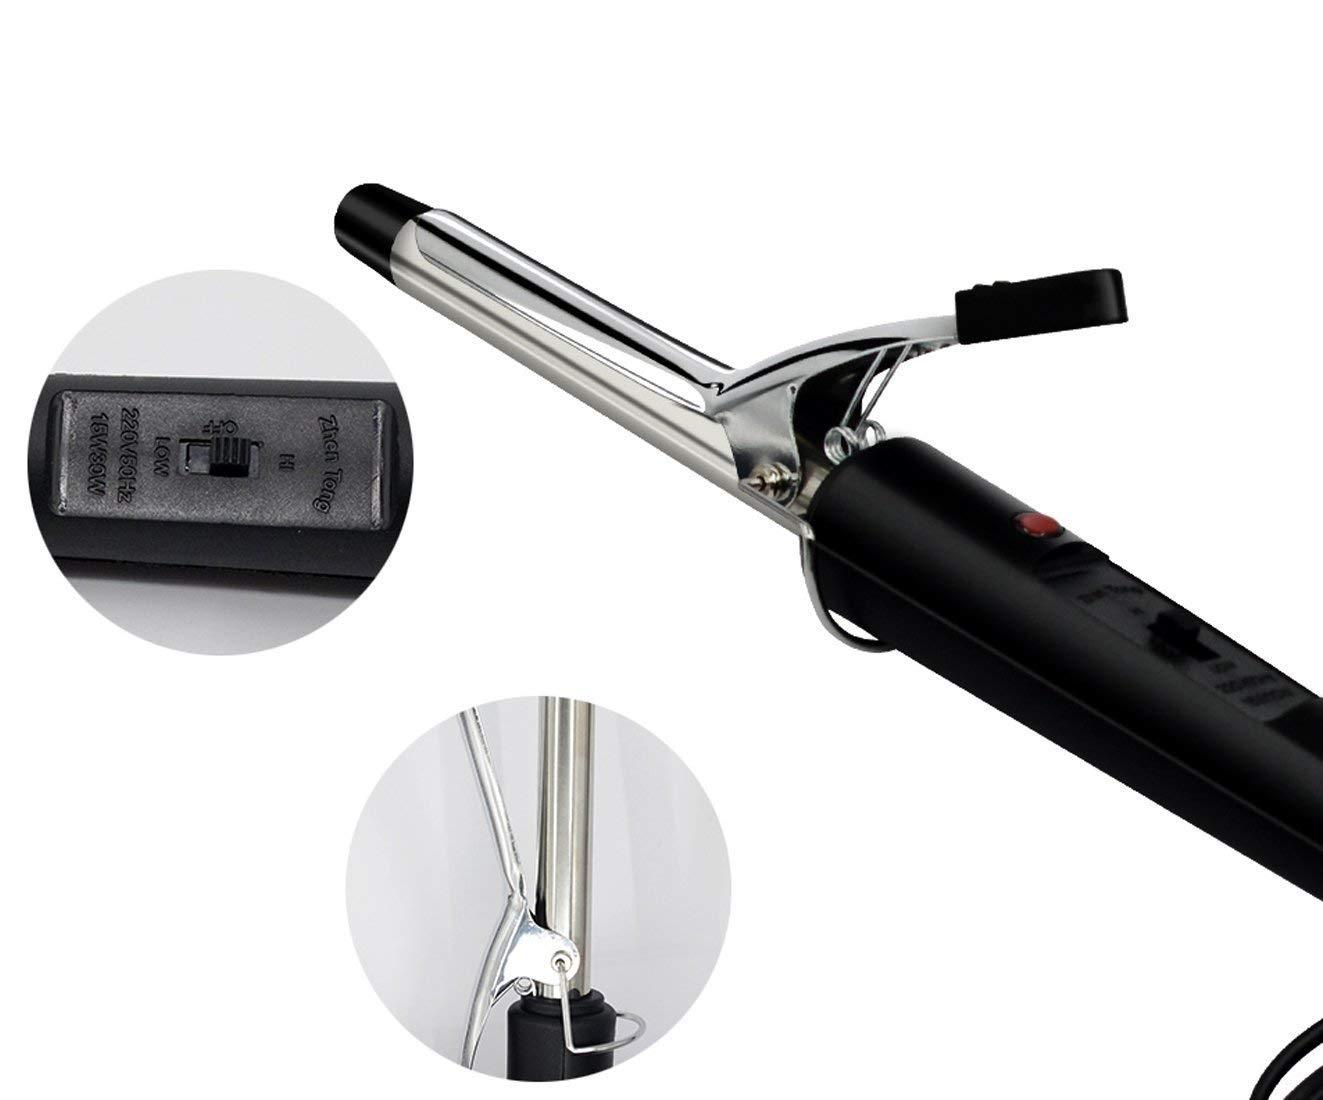 1343 Hair Curling Iron Rod for Women (black) - SkyShopy